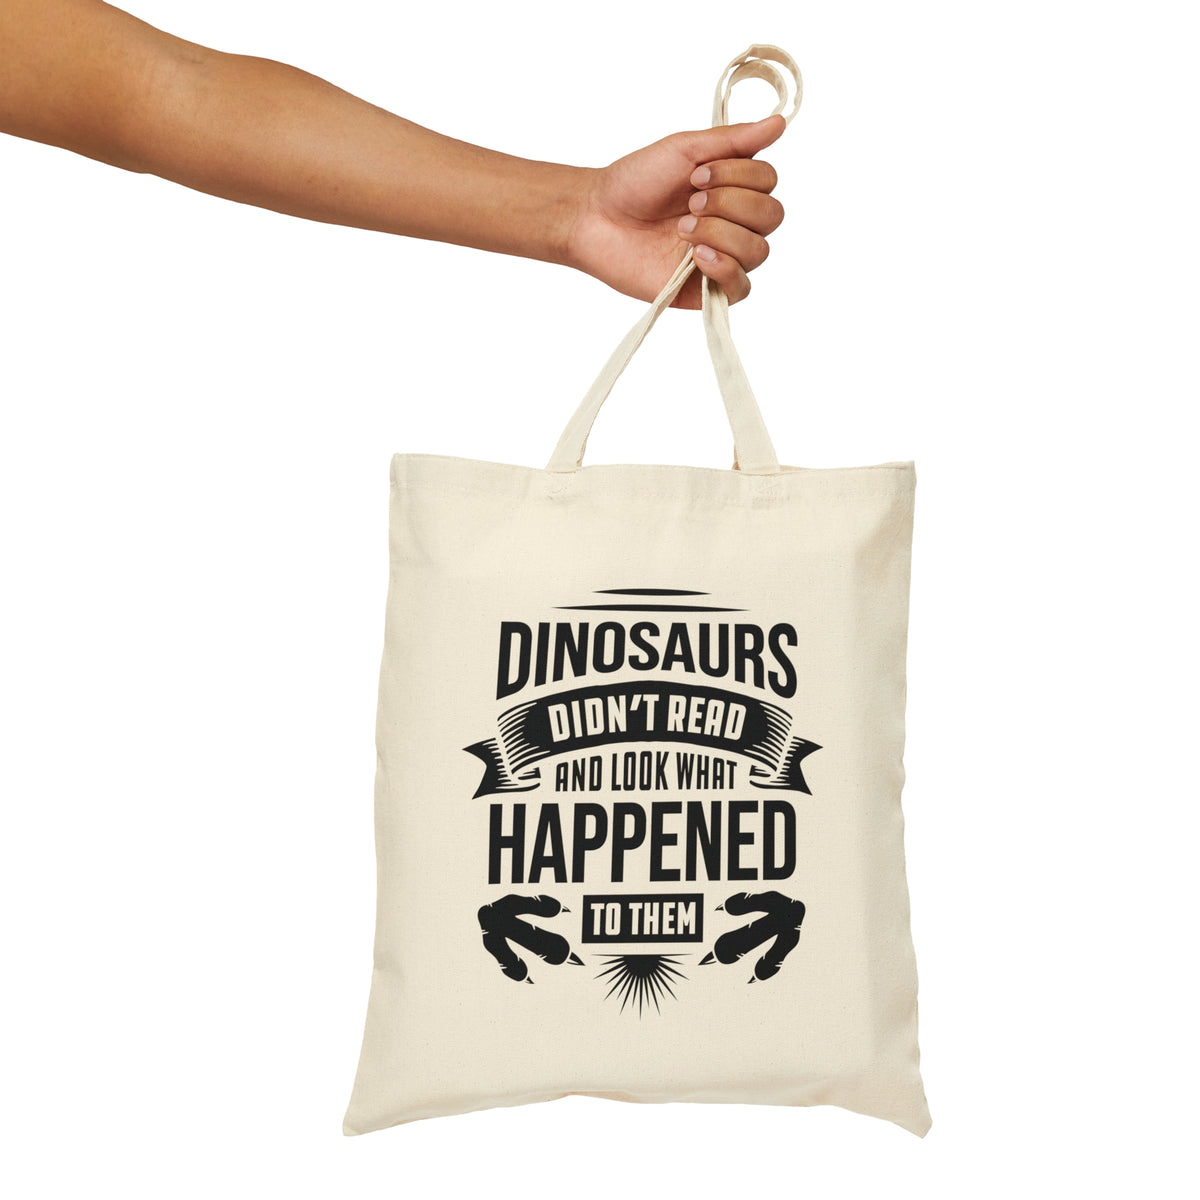 Dinosaurs Didn't Read Book Worm Reading Tote Bag | Library Gift Book Bag | Cotton Canvas Tote Bag